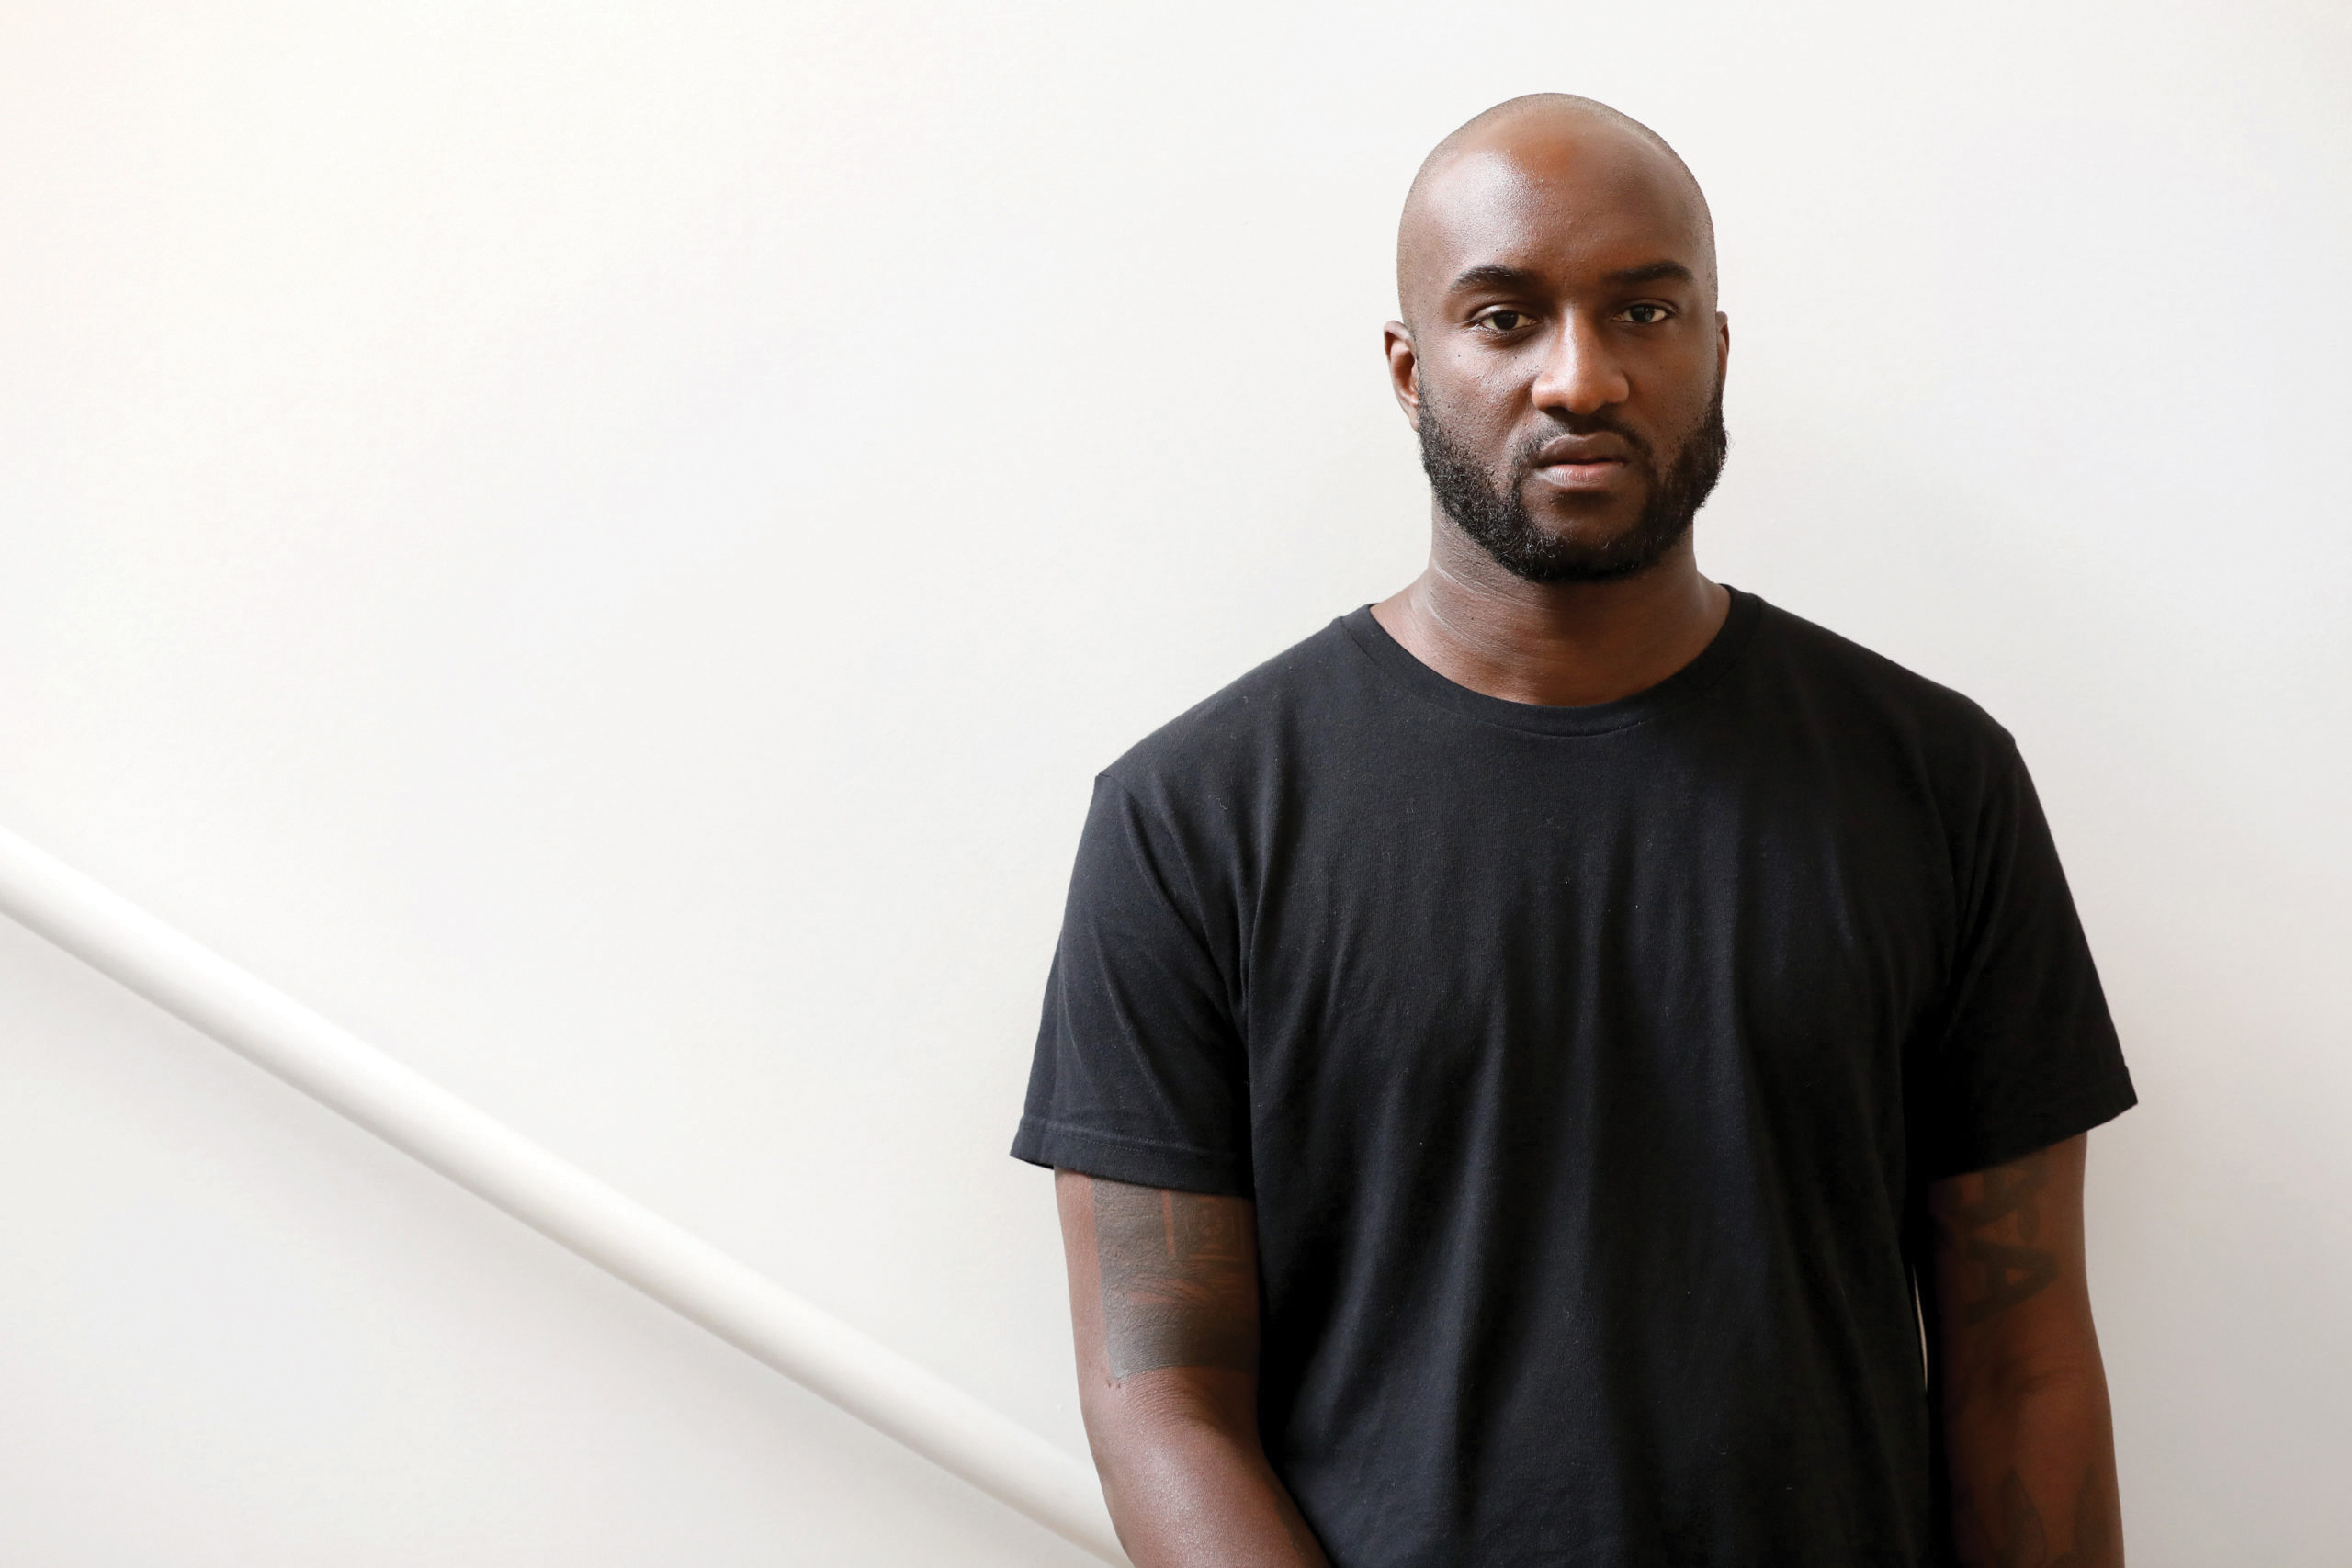 Pattern designer Virgil Abloh dies of most cancers at 41 | Richmond Completely free Press